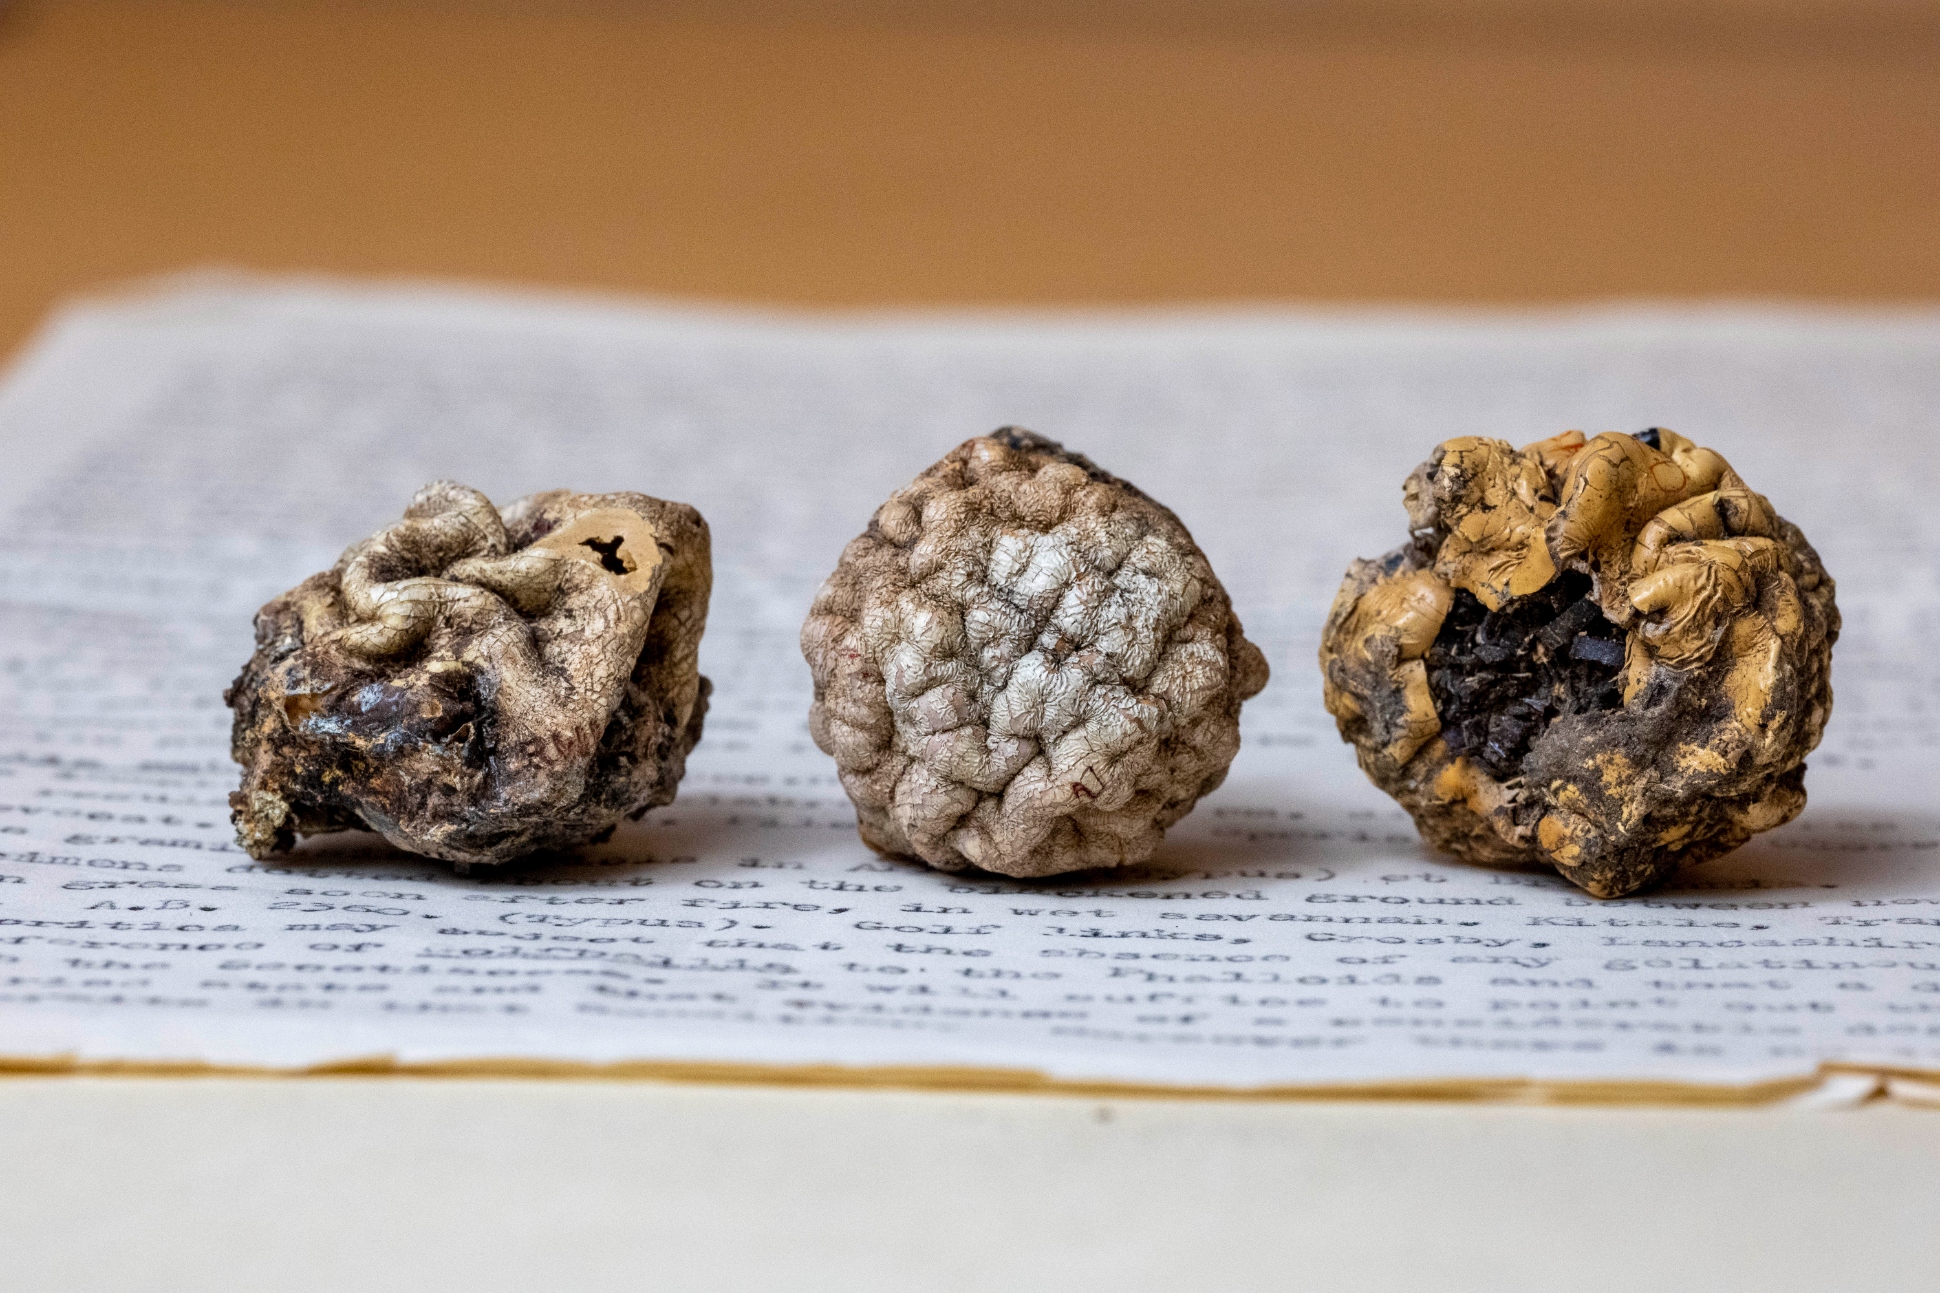 All three Golfballia ambusta specimens lined up side by side